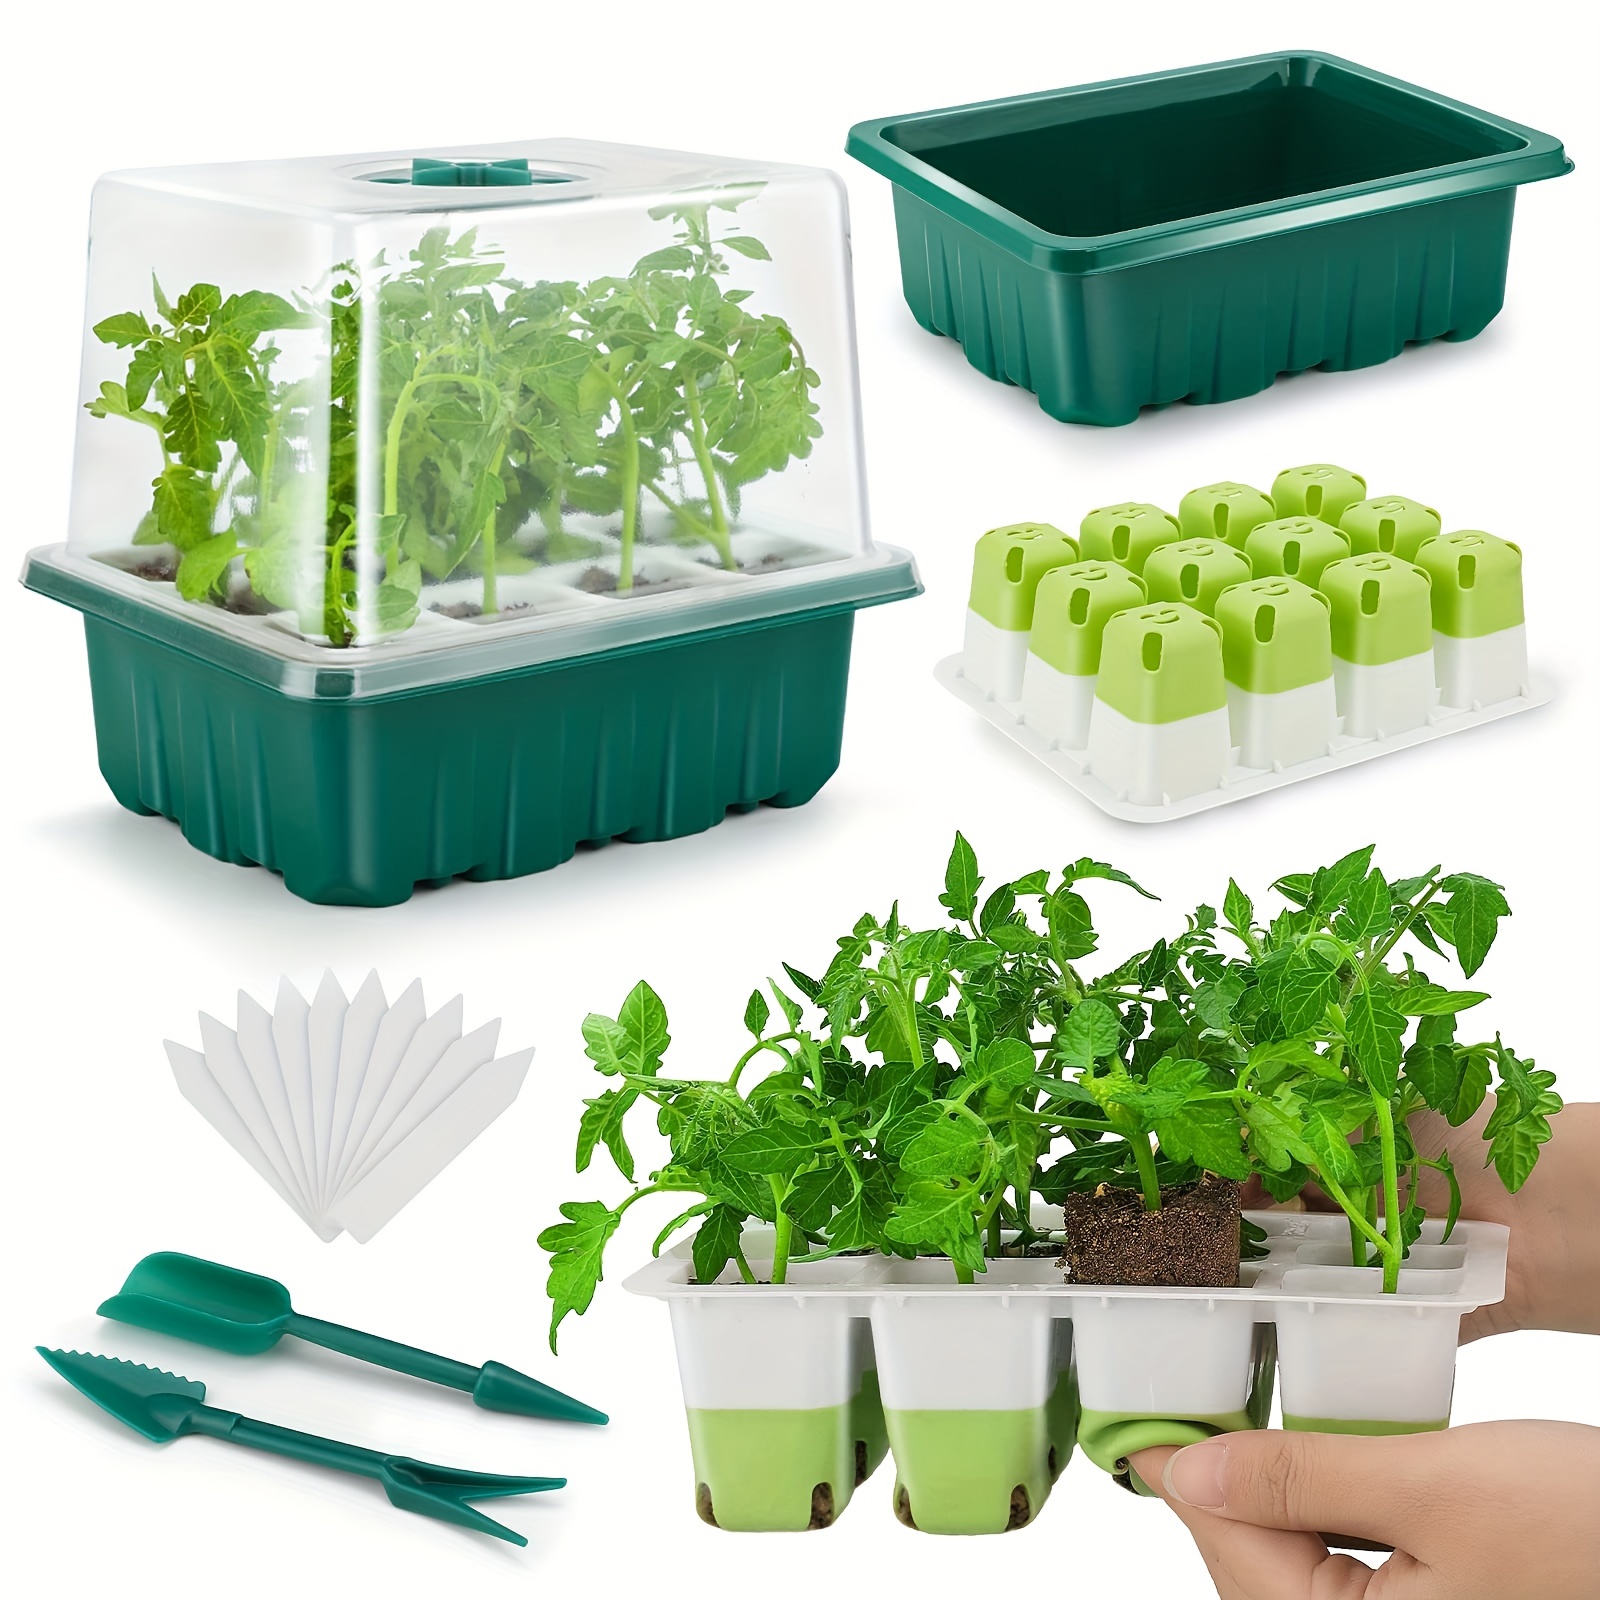 Silicone Seeds Starter Tray Seeds Starting Trays With 12 Cells Mini  Greenhouse Germination Trays For Seeds